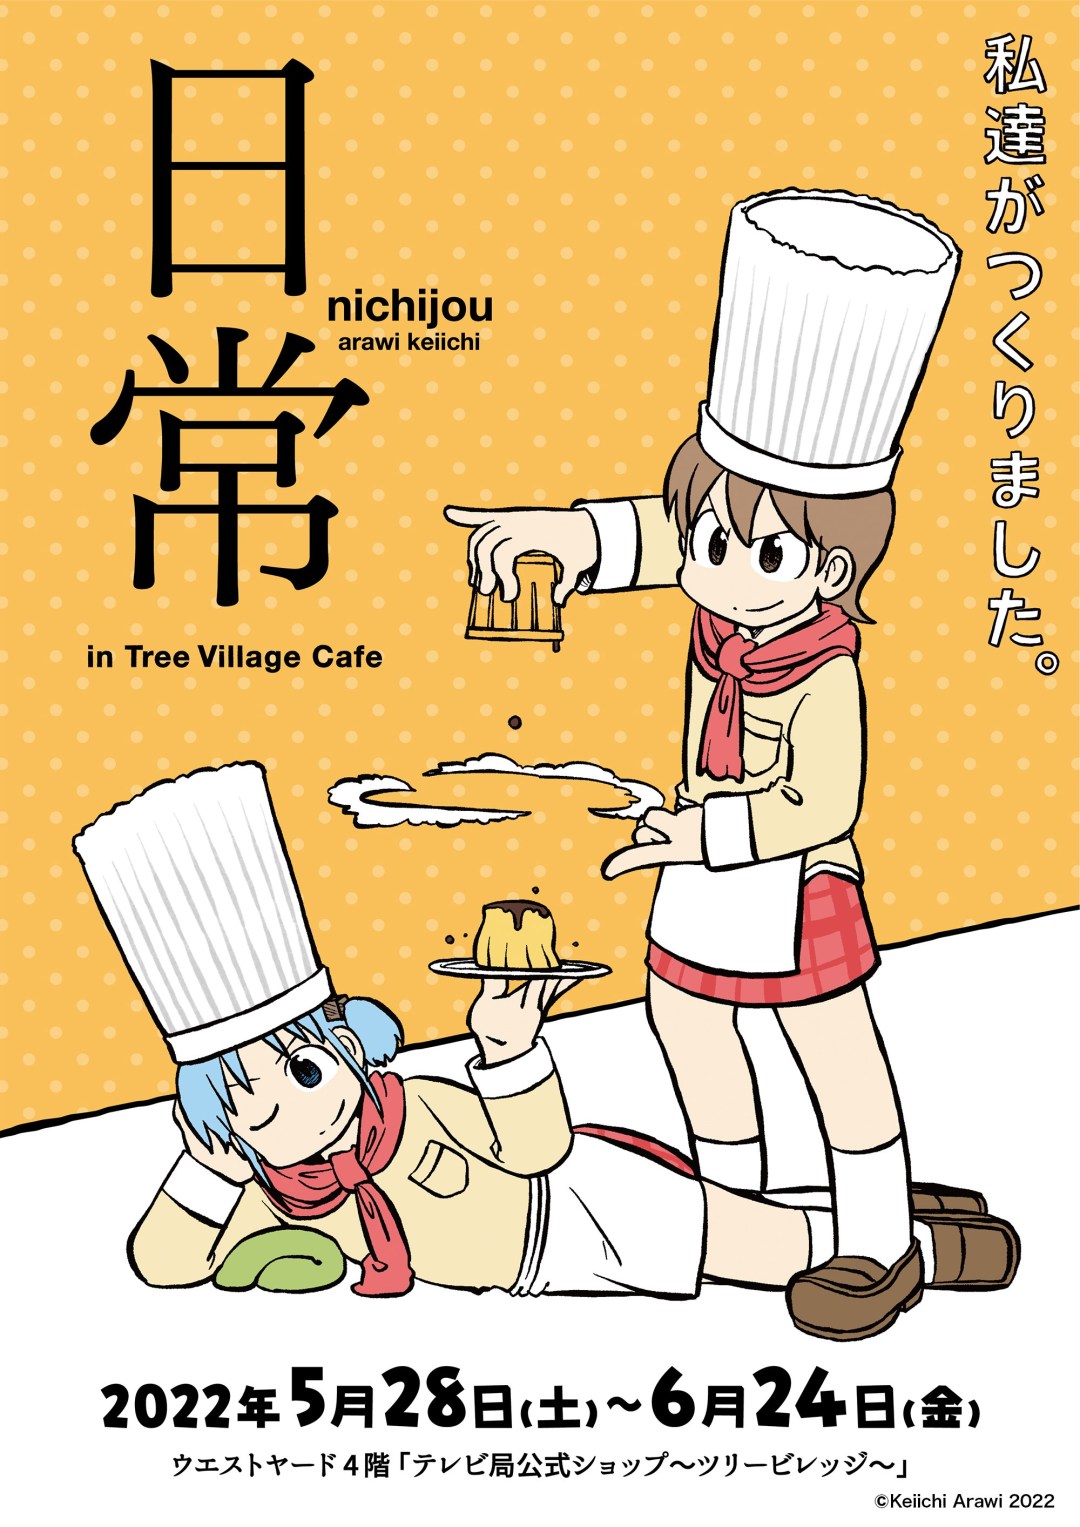 Picture of: Crunchyroll – Nichijou – My Ordinary Life Cafe Gives People the